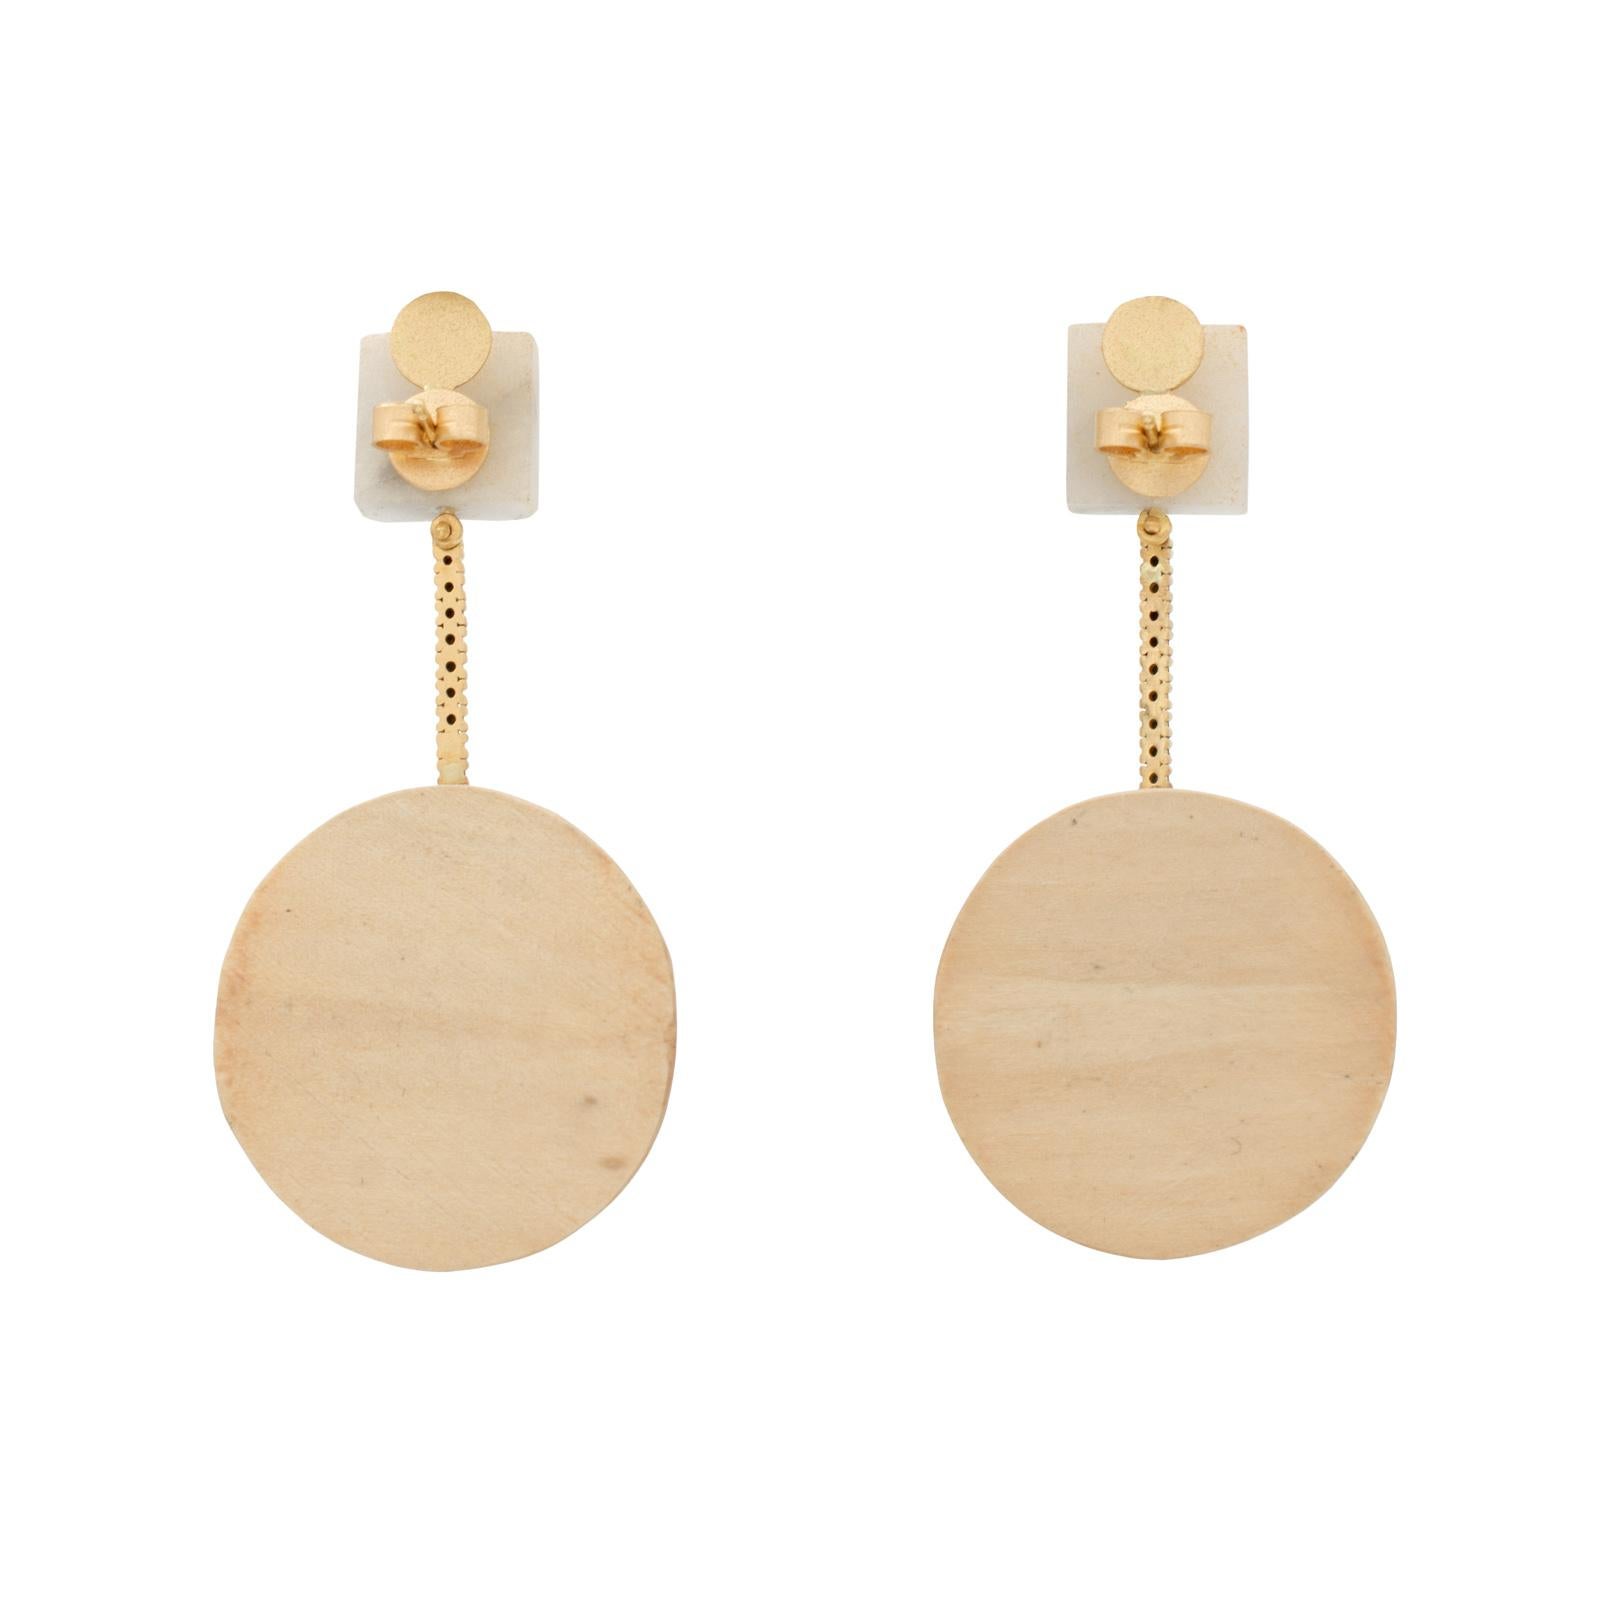 Square cut Marble earrings with 21 black diamonds (1.3mm) set in 18 carat recycled gold ascending to Vintage wooden balls. The perfect balance of modern and natural elements. All pieces are one-of-a-kind and handmade by a single artisan in the USA